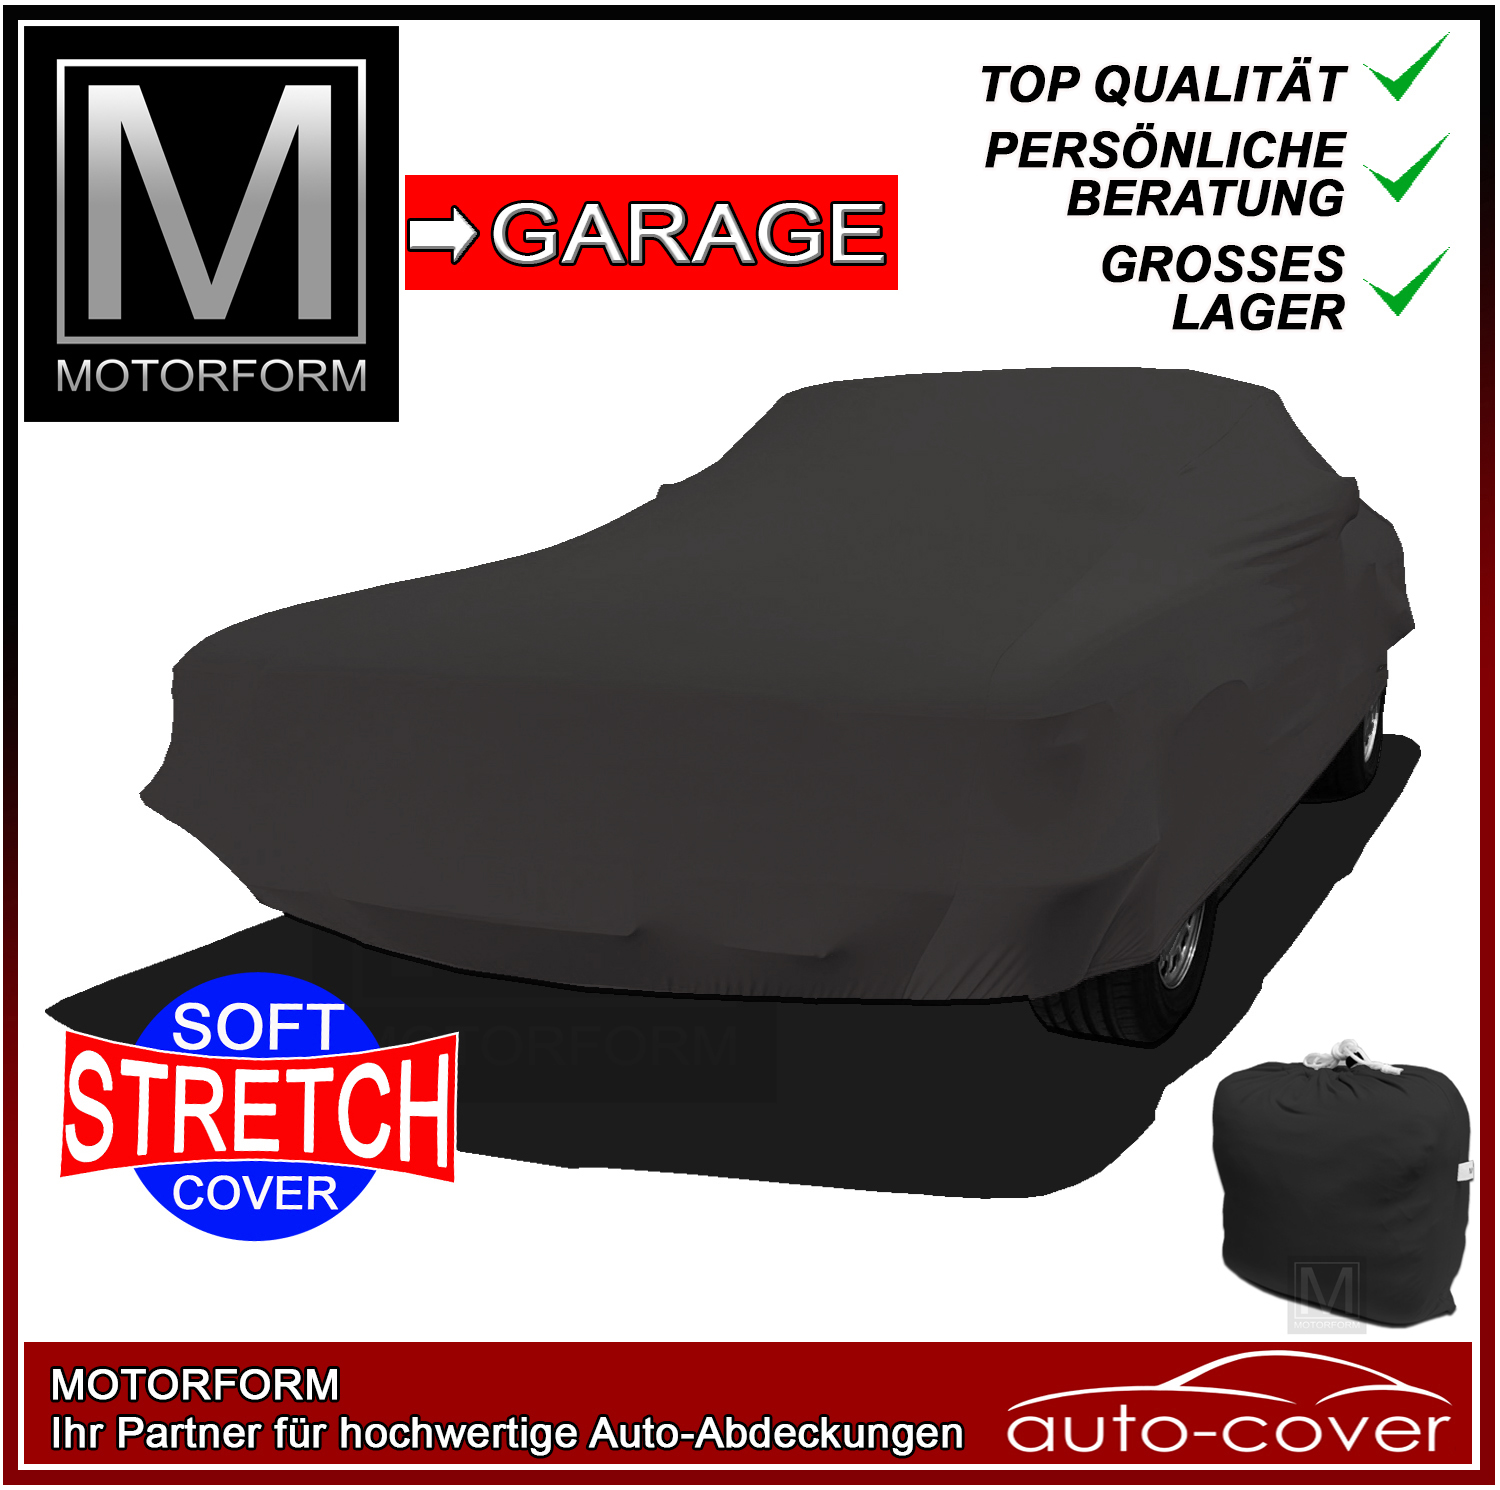 Super Stretchy Cover for Mercedes W108 250S-280SE SWB